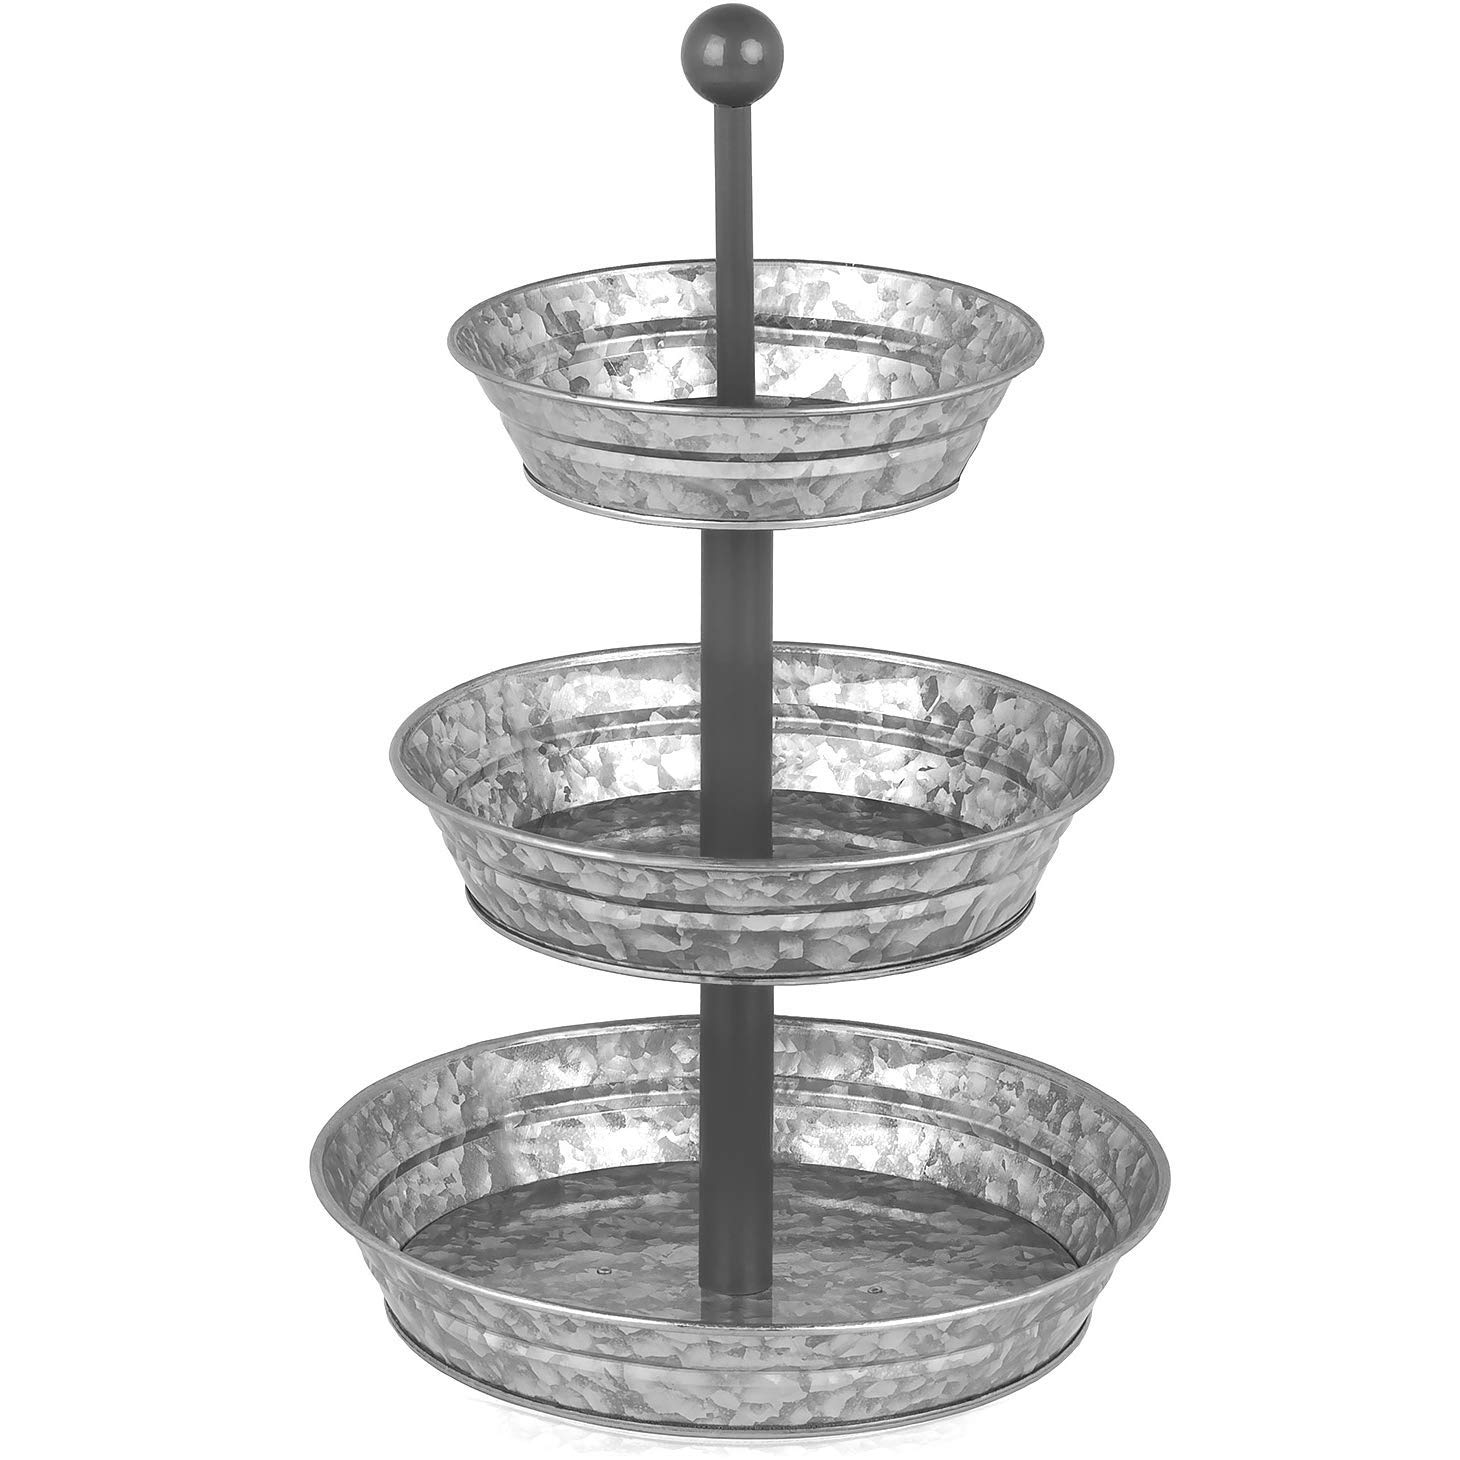 3 Tier Serving Tray - Galvanized, Rustic Metal Stand. Dessert, Cupcake, Fruit & Party Three Tiered Platter. Country Farmhouse Vintage Decor for the Kitchen, Home, Farm & Outdoor